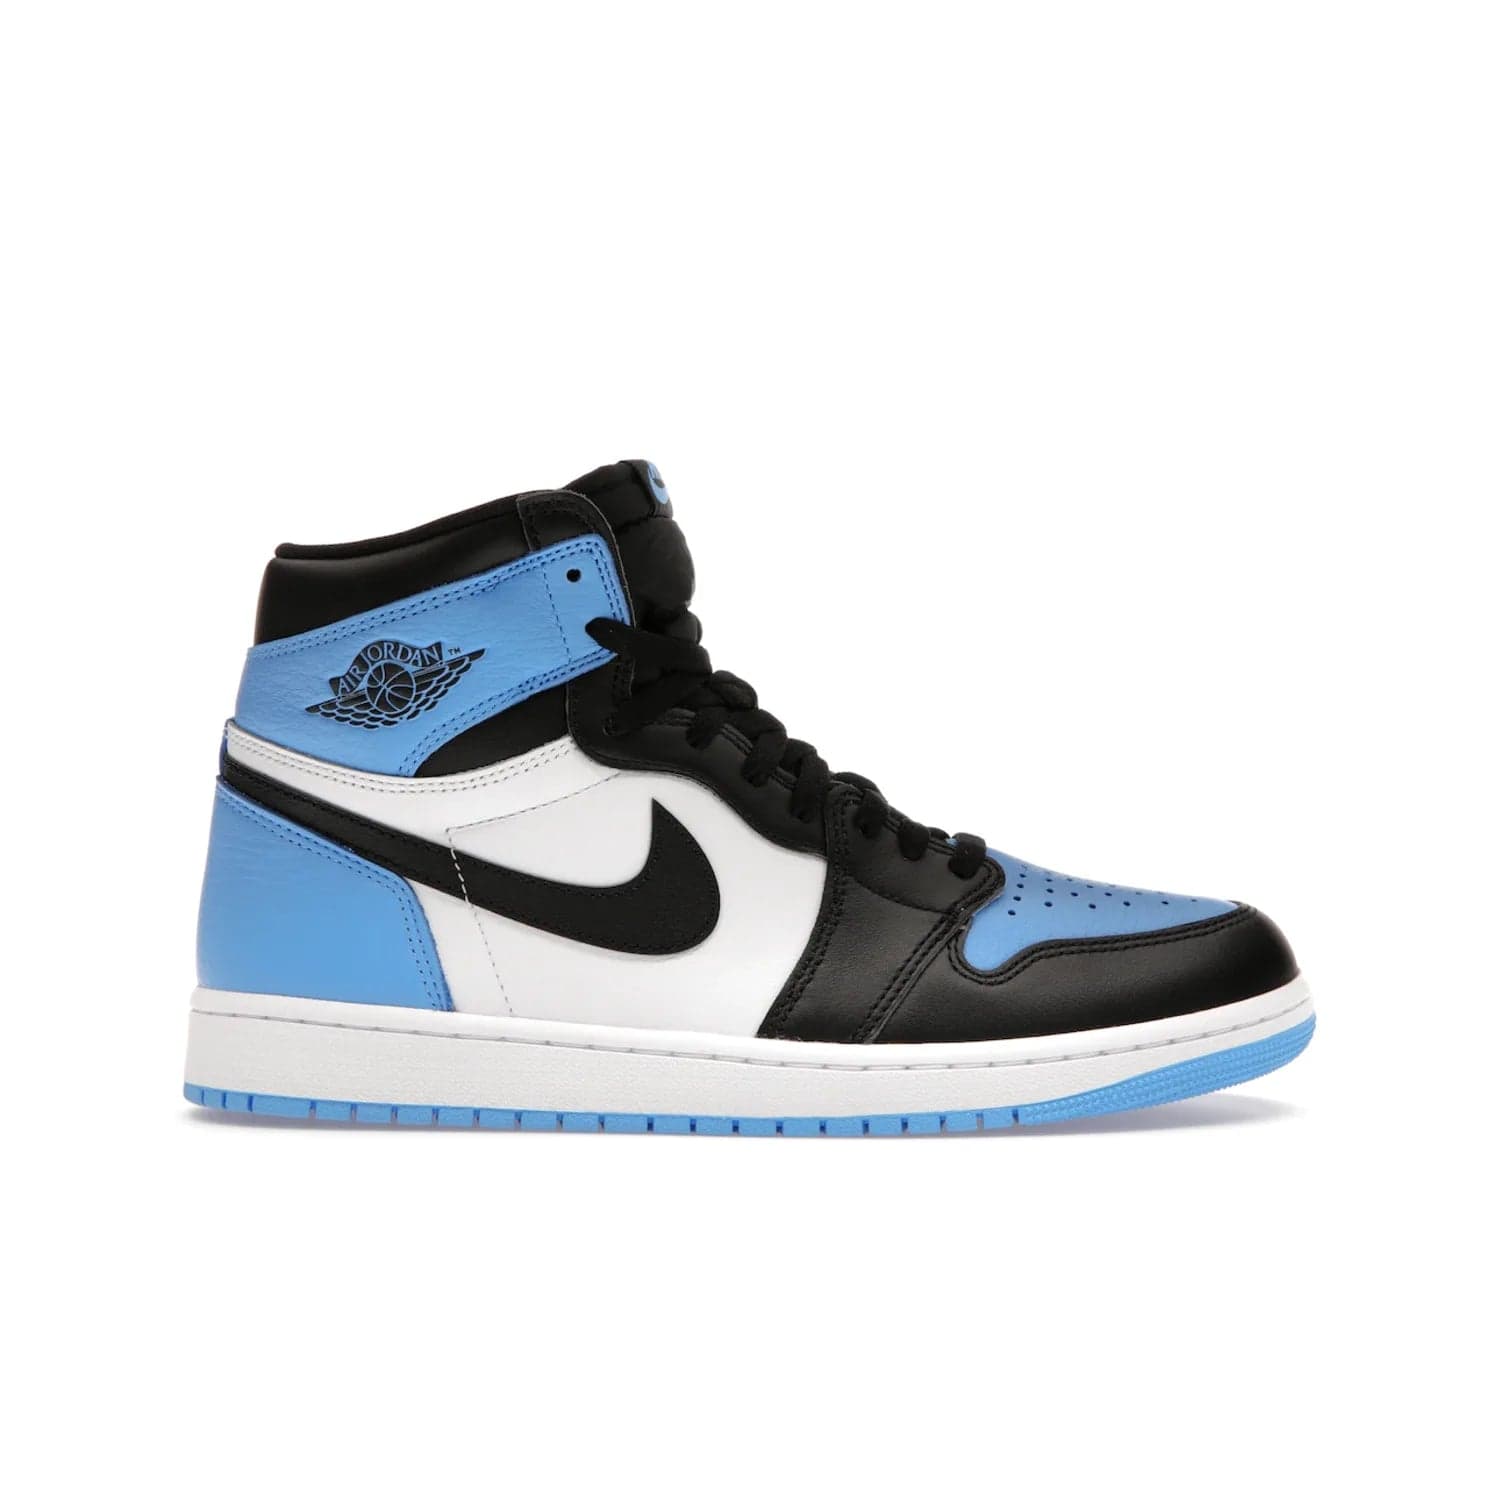 Jordan 1 Retro High OG UNC Toe - Image 1 - Only at www.BallersClubKickz.com - Jordan 1 High OG UNC Toe is a fashionable, high-quality sneaker featuring University Blue, Black White and White. Releasing July 22, 2023, it's the perfect pick up for sneakerheads.